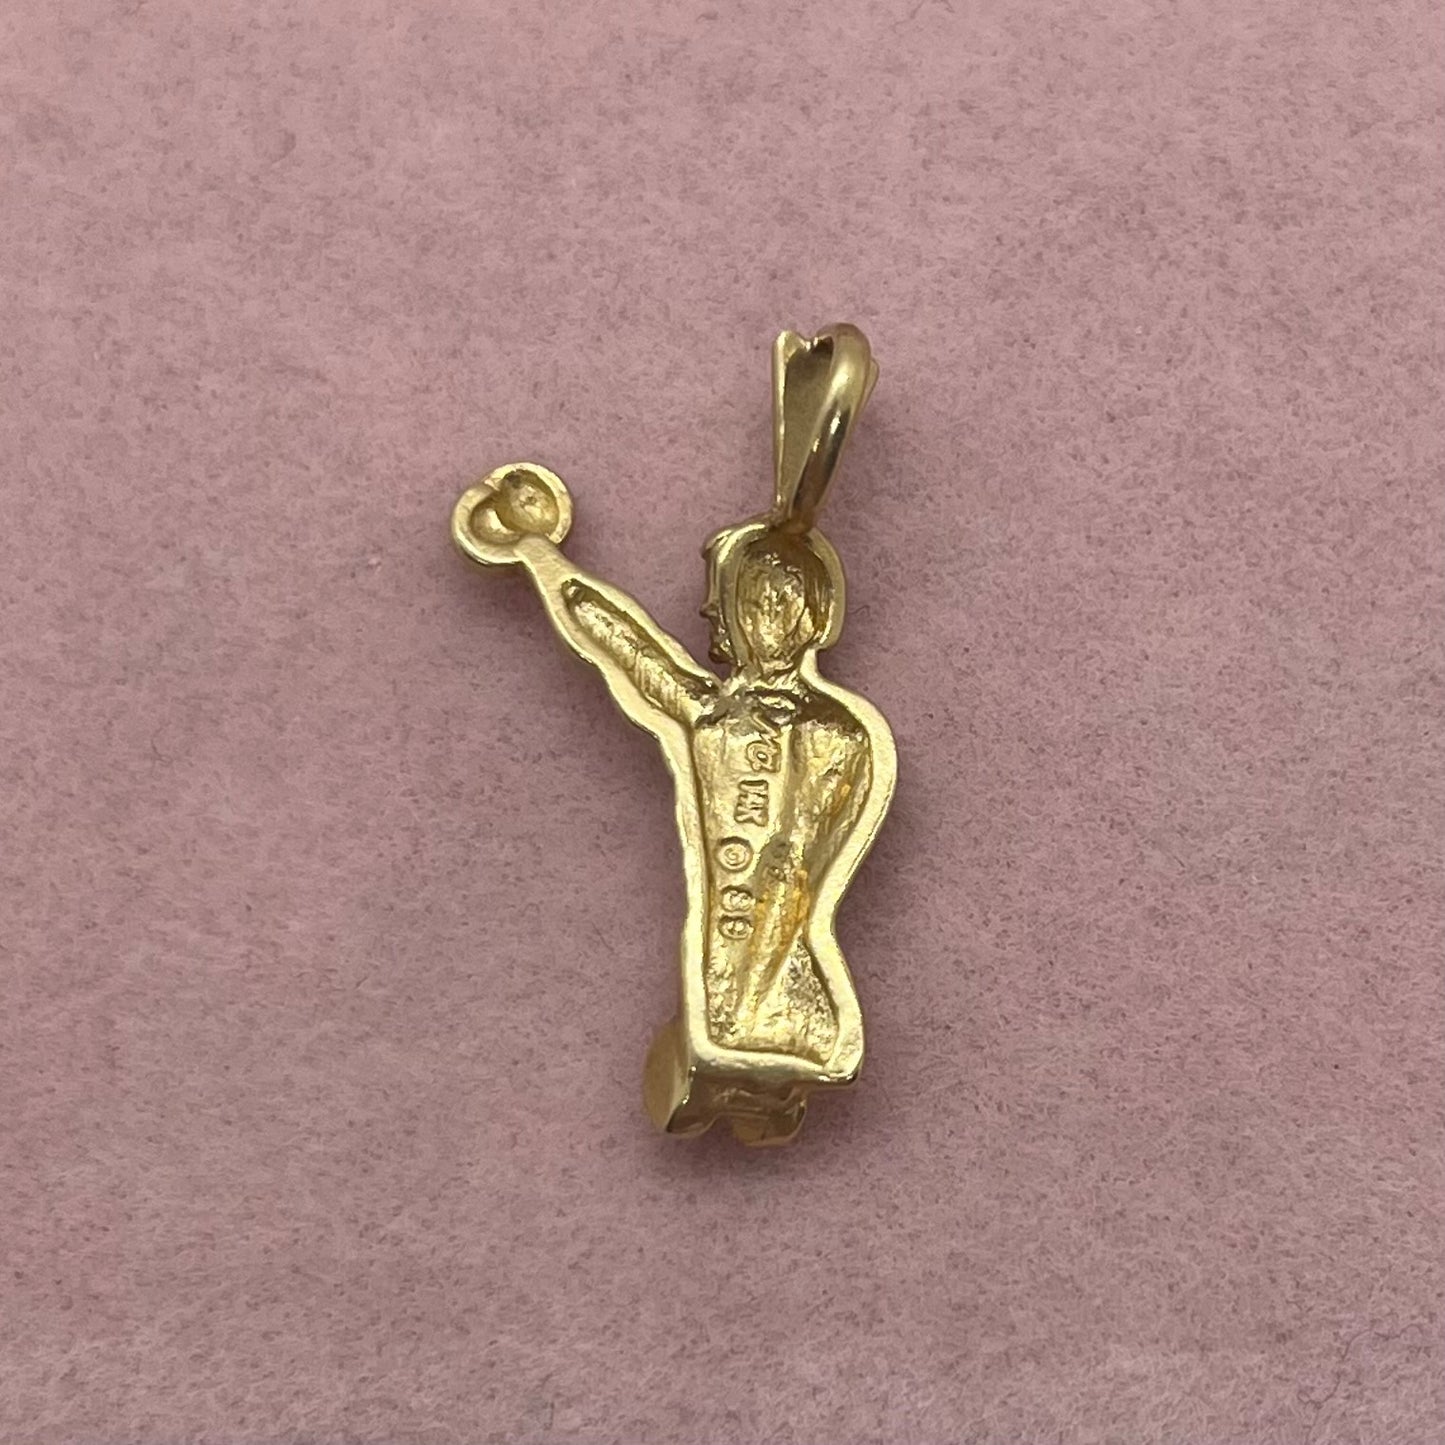 Body Builder Pendant by Michael Anthony